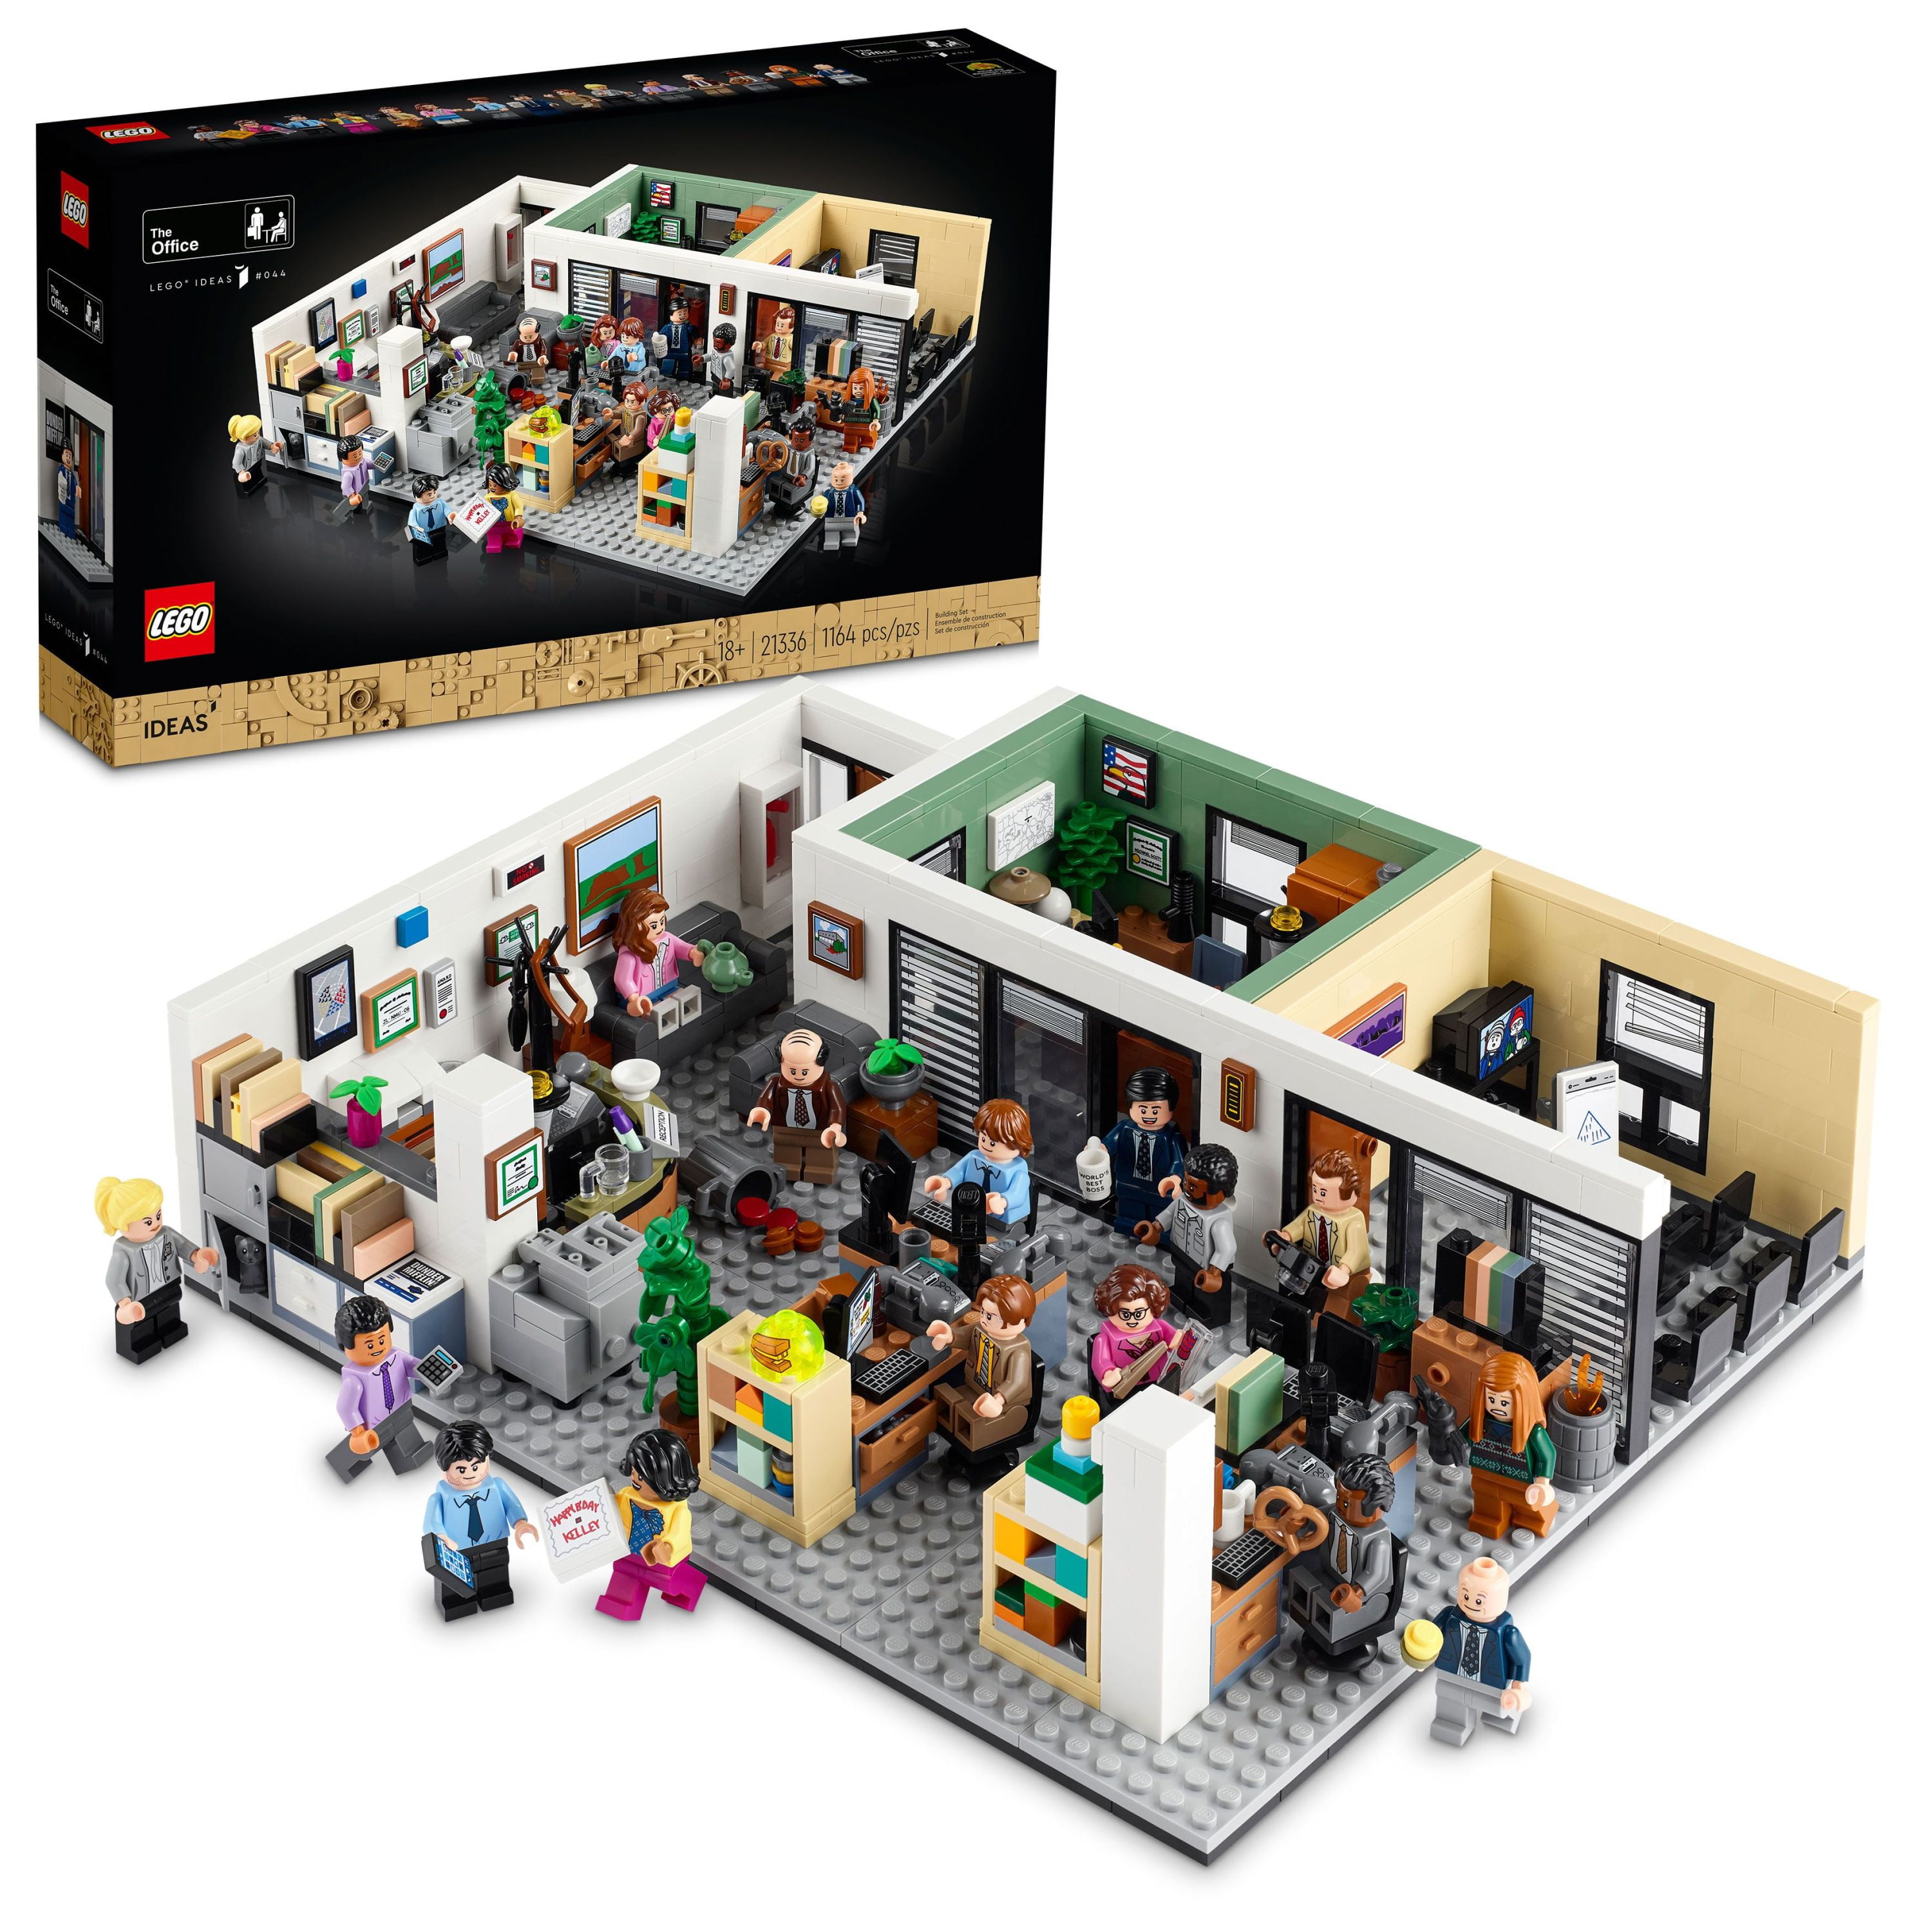 Electrify Ubestemt absolutte LEGO Ideas The Office 21336 US TV Show Series Dunder Mifflin Scranton Model  Building Set, 15 Characters Minifigures, Iconic Gift for Adults and Teens -  Walmart.com